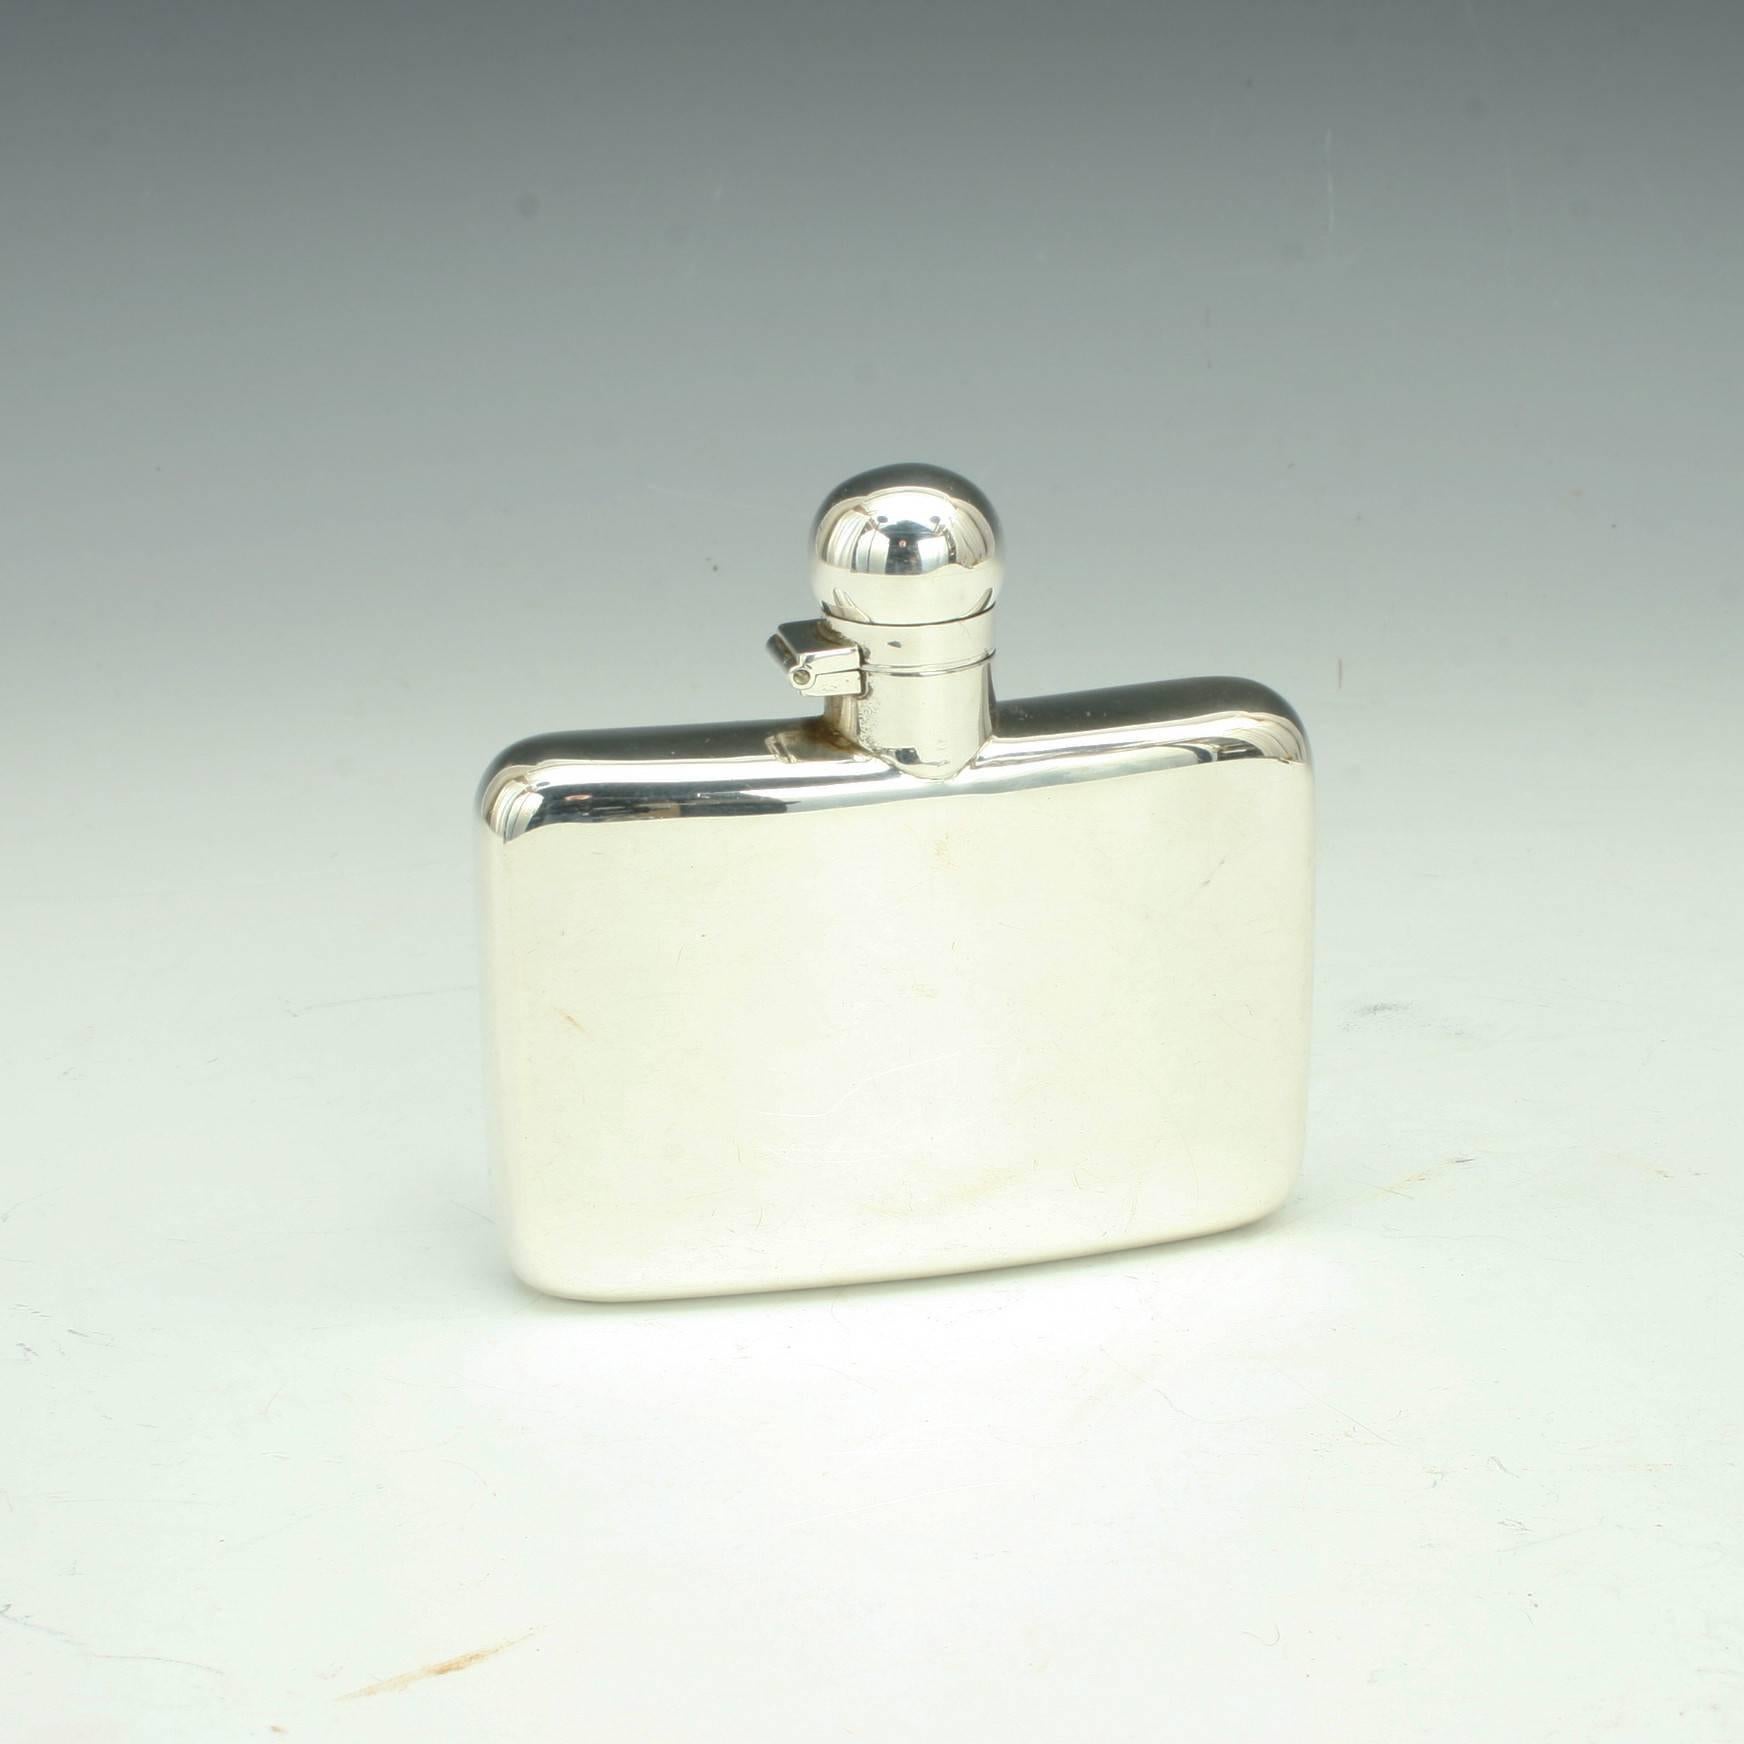 Small silver hip flask. 
A beautiful small silver hip flask with curved back. The flask with simple bayonet screw top lid. A very nice piece, hallmarked London, 1904, with manufactures details S.I. Ltd. Stokes & Ireland Ltd (William Henry